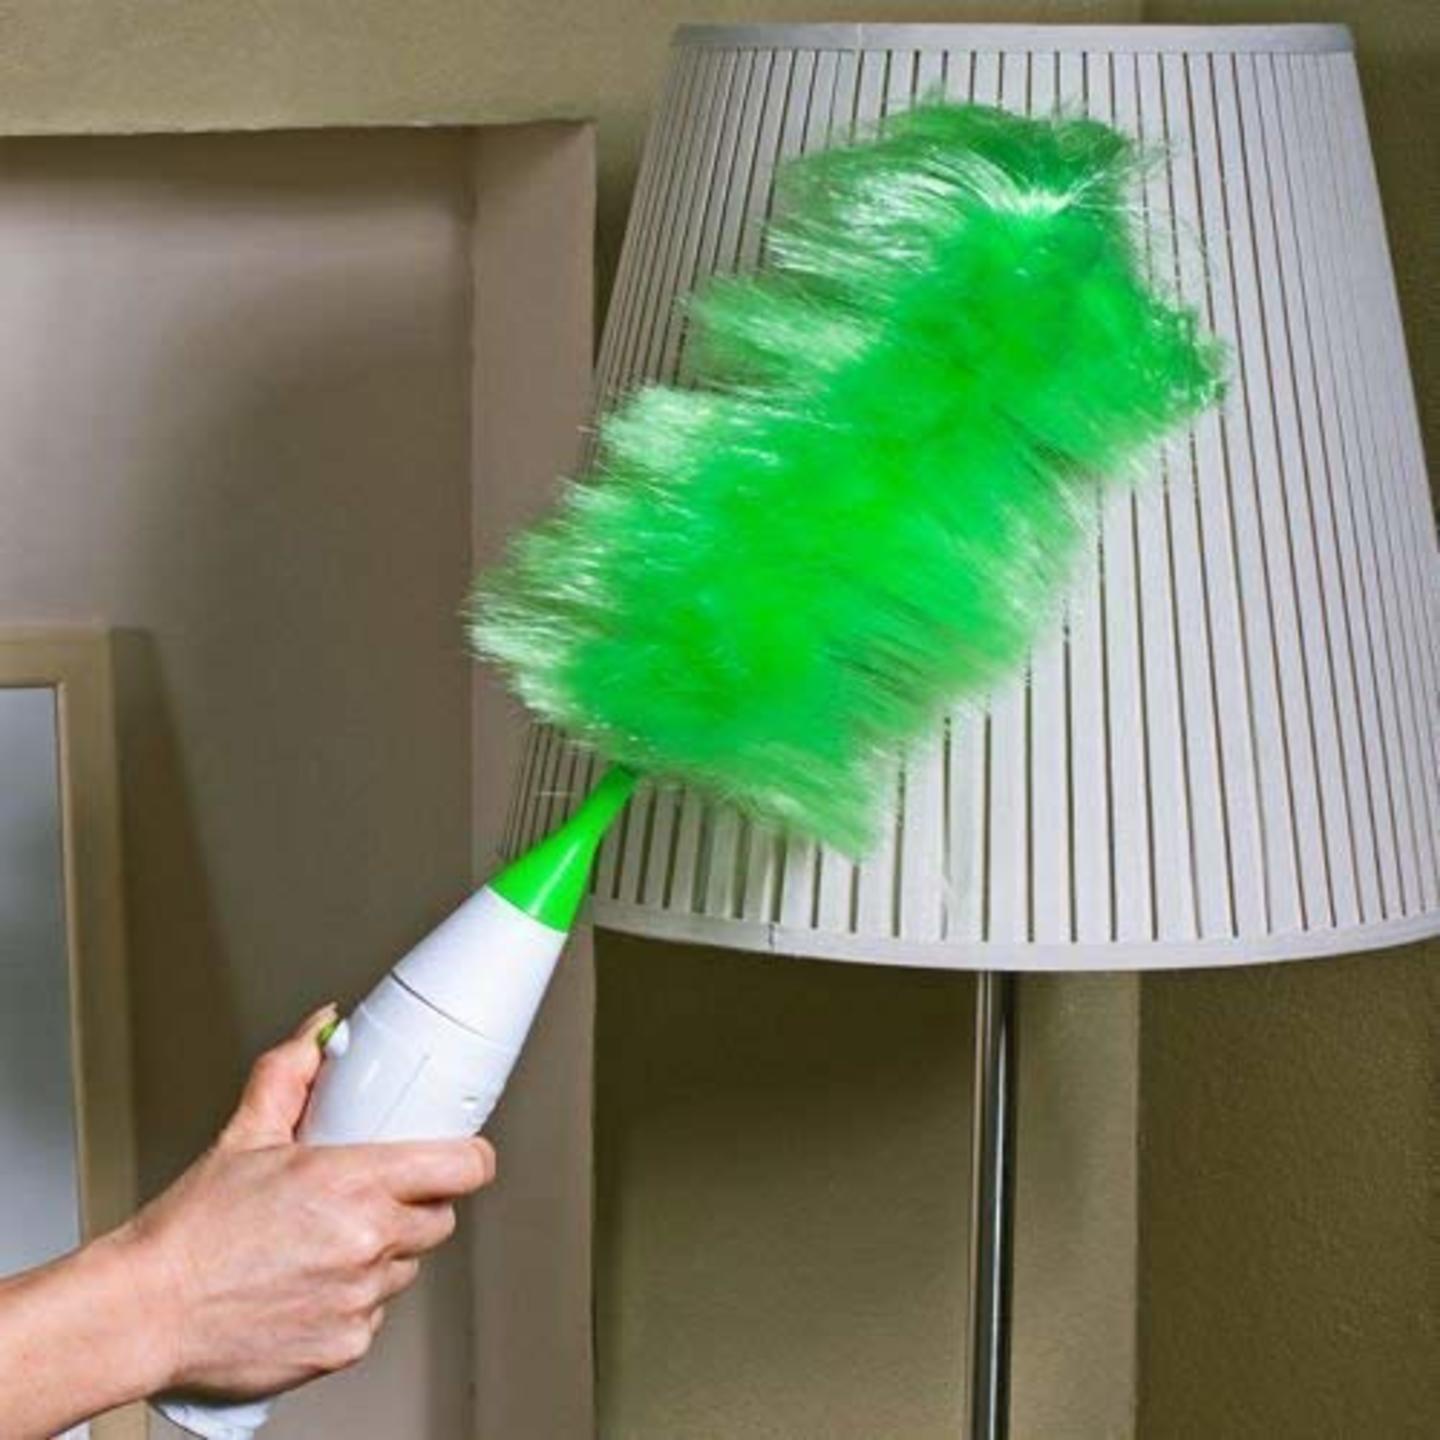 Ebott Creative Hand-Held, Sward Go Dust Electric Feather Spin Home Duster, Green. Electronic Motorised Cleaning Brush Set